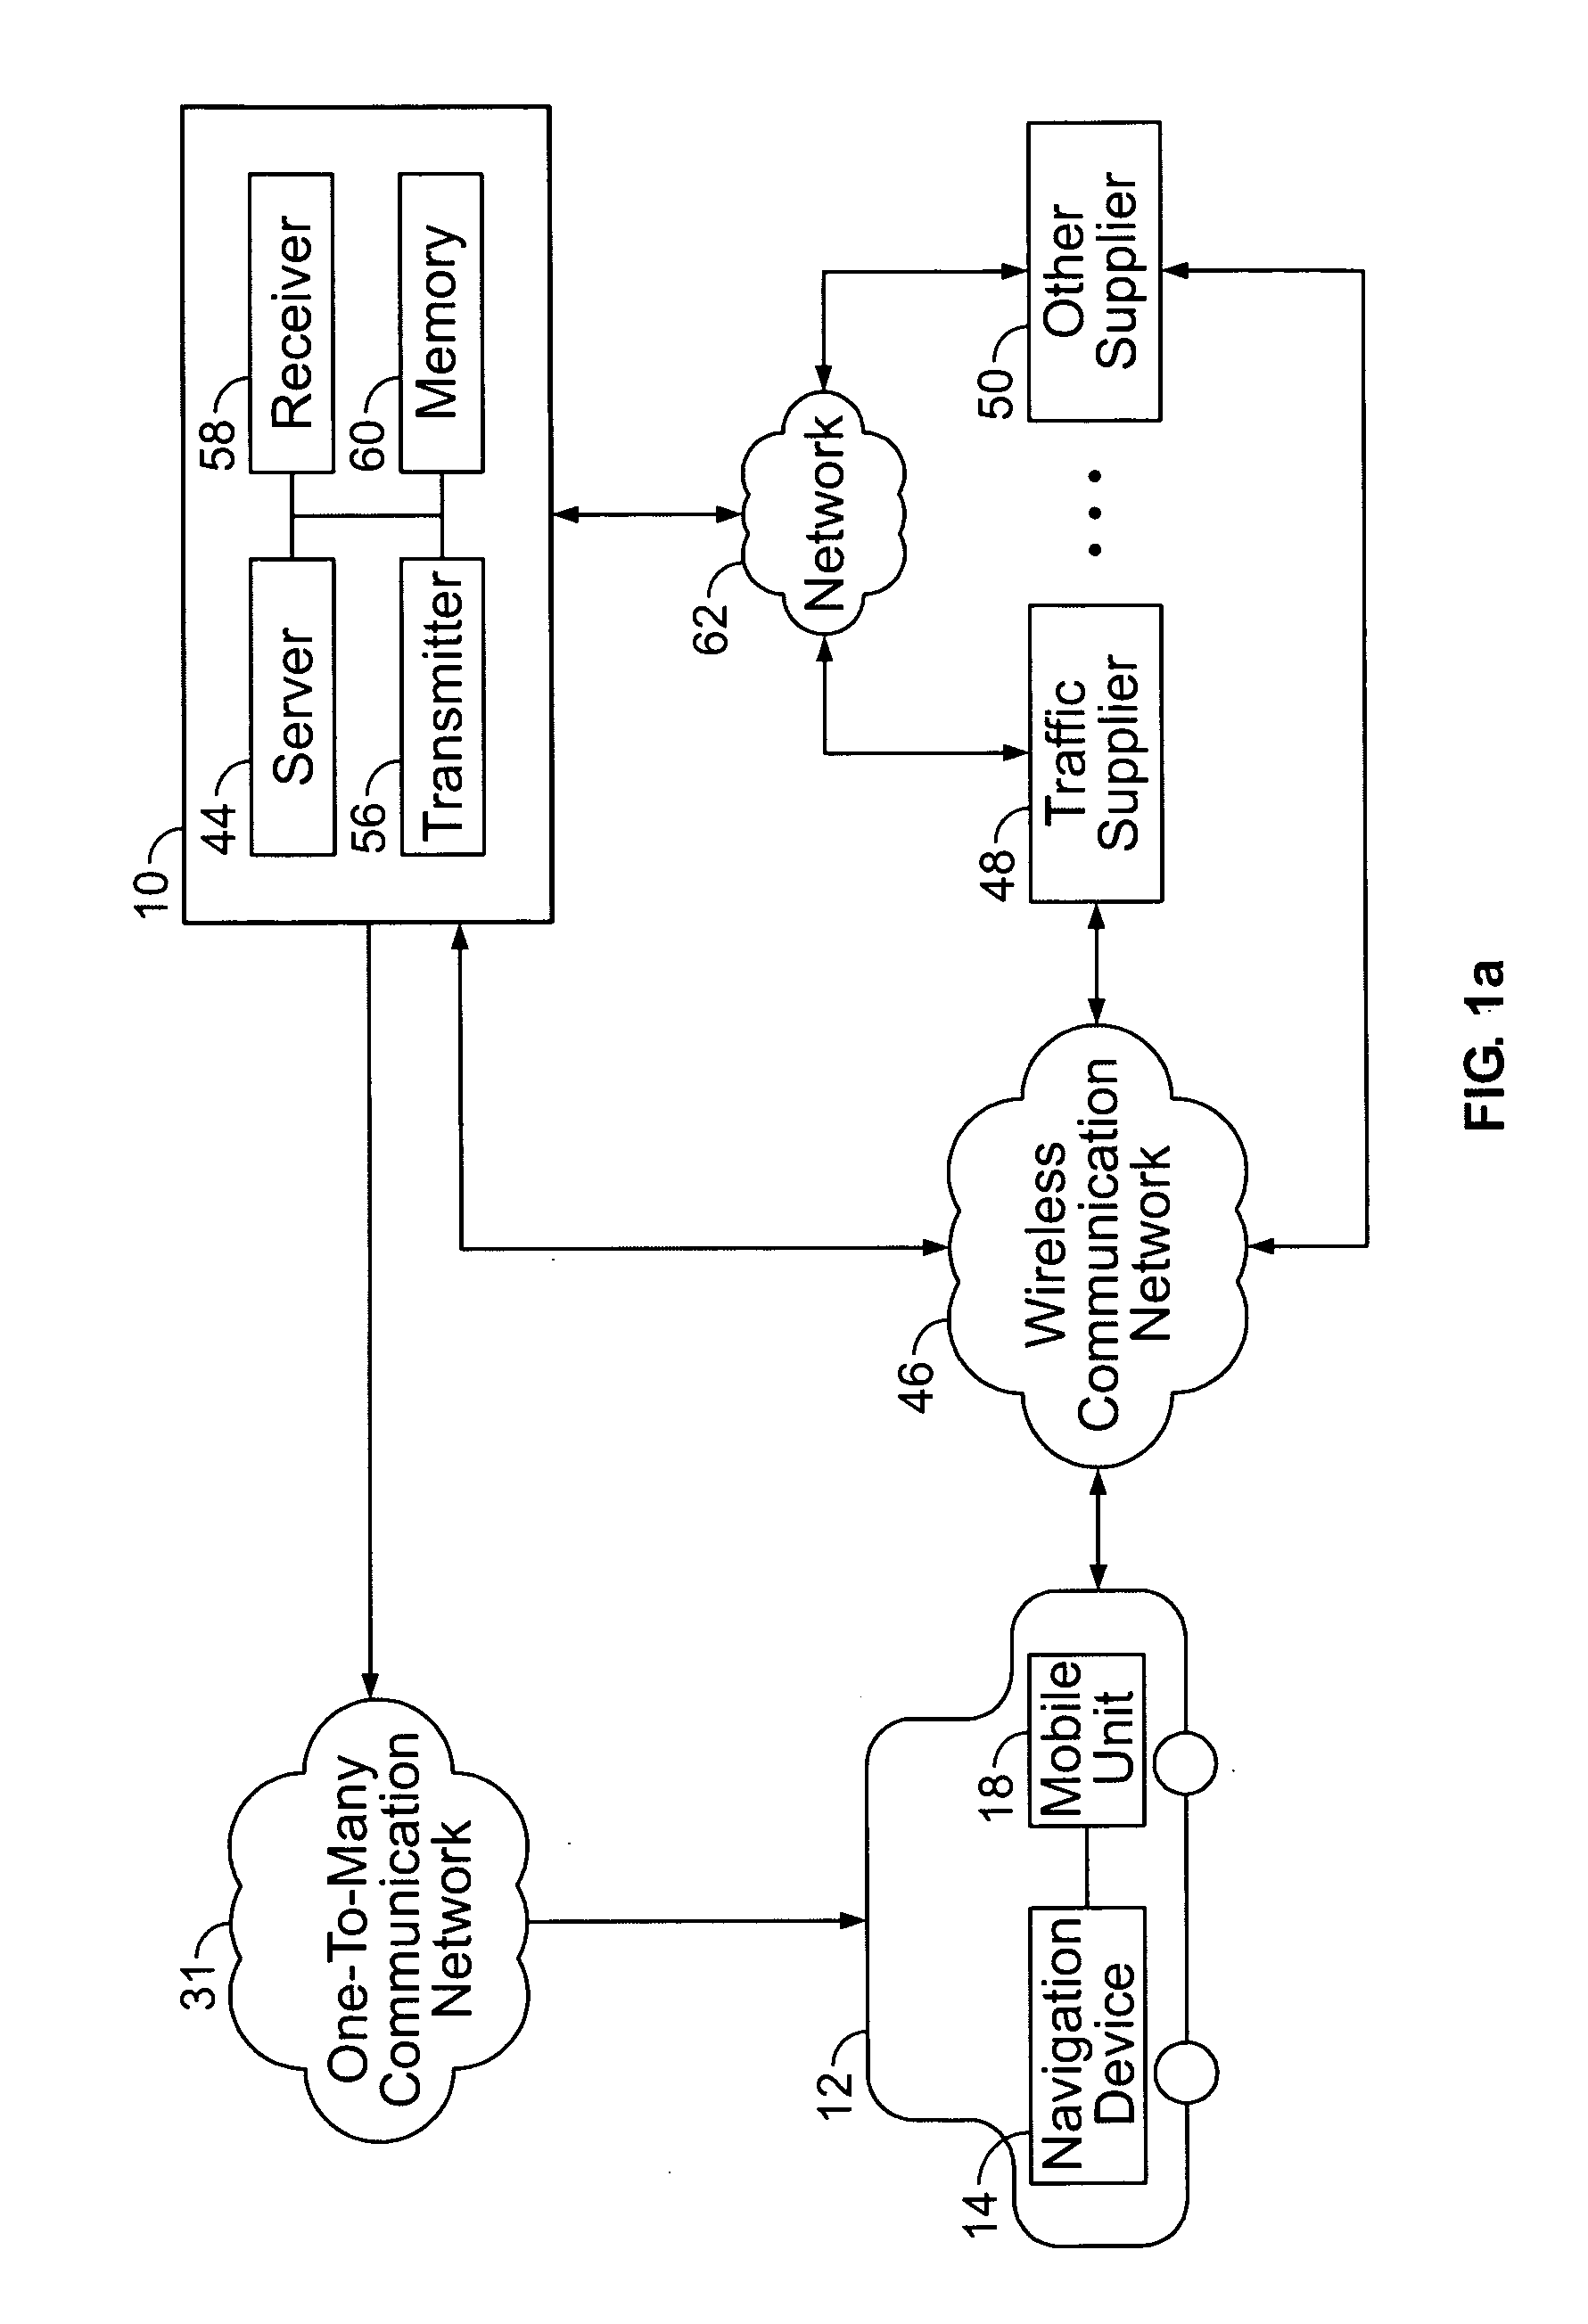 Method and system for remote immobilization of vehicles